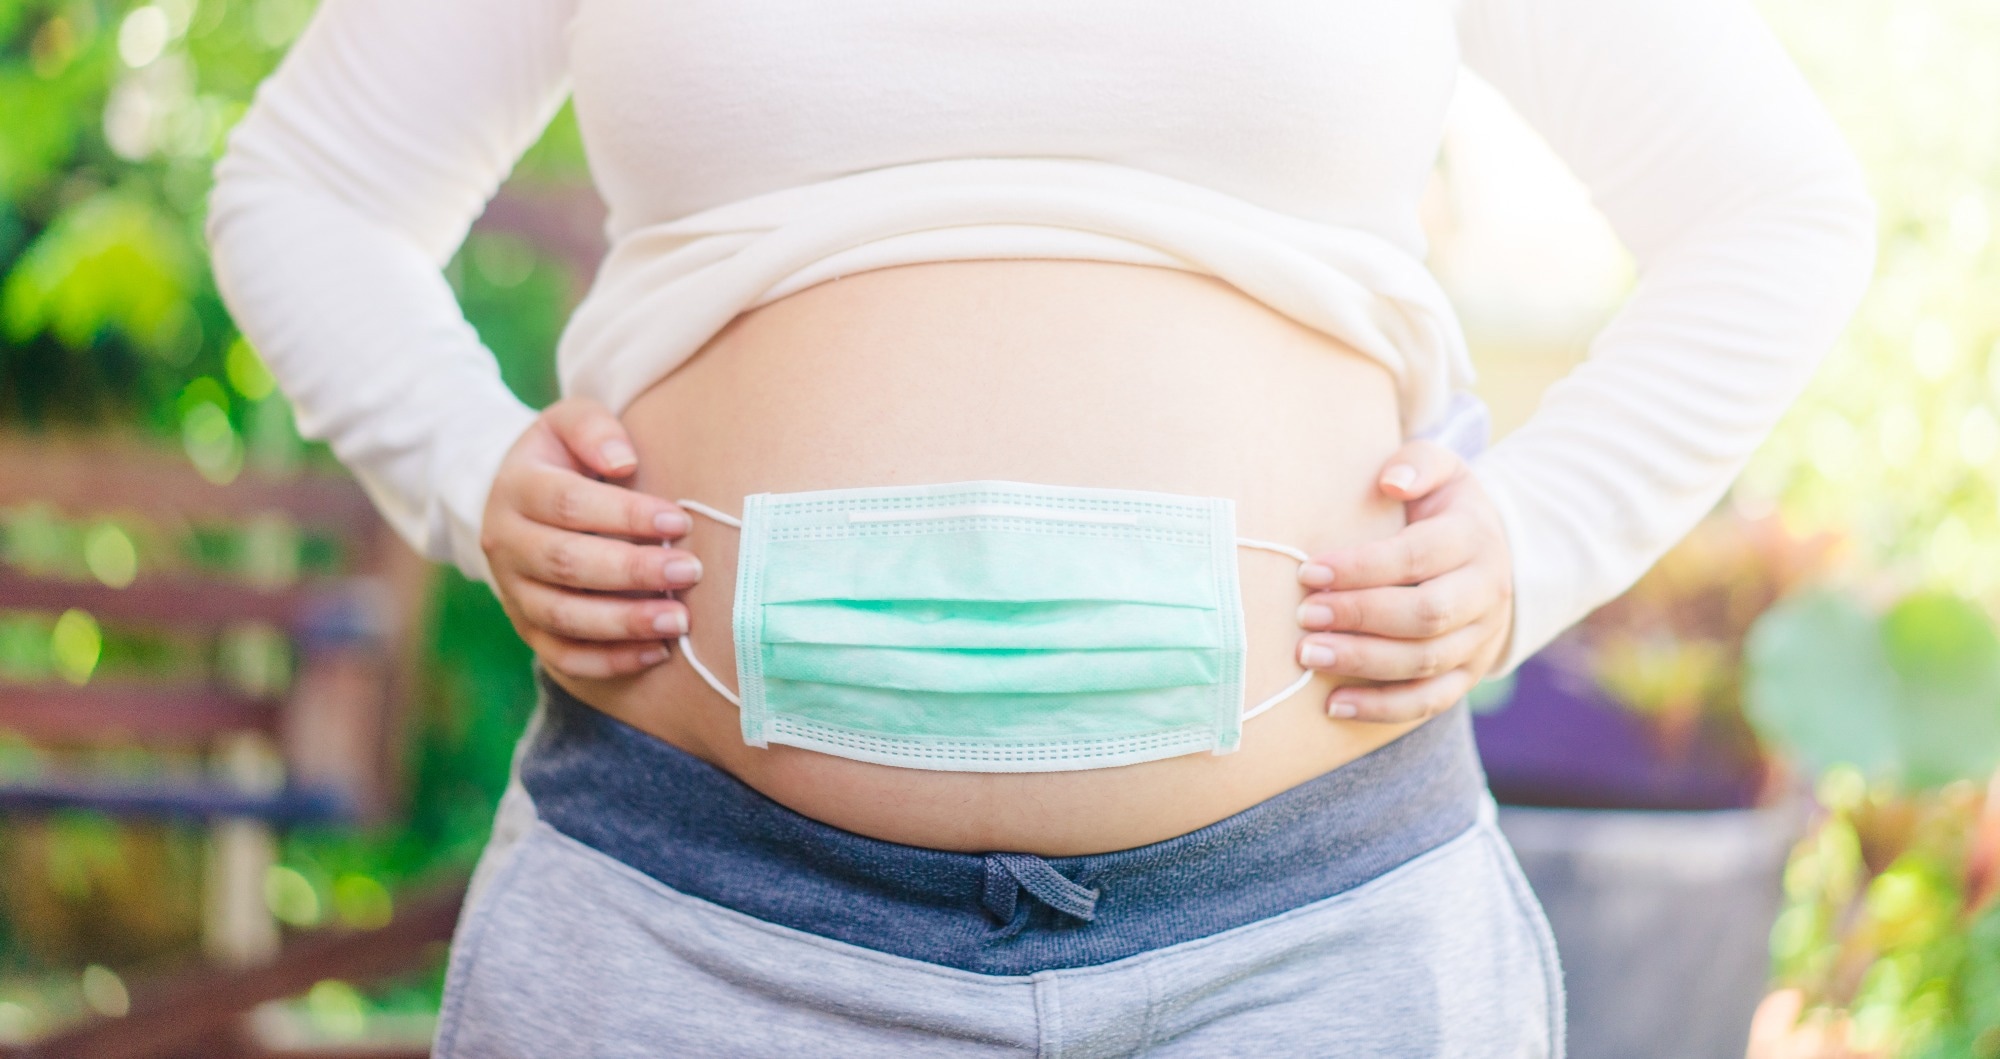 Study: What’s past is prologue: growth in infants born from pregnancies complicated by SARS-CoV-2 infection. Image Credit: MIAStudio/Shutterstock.com